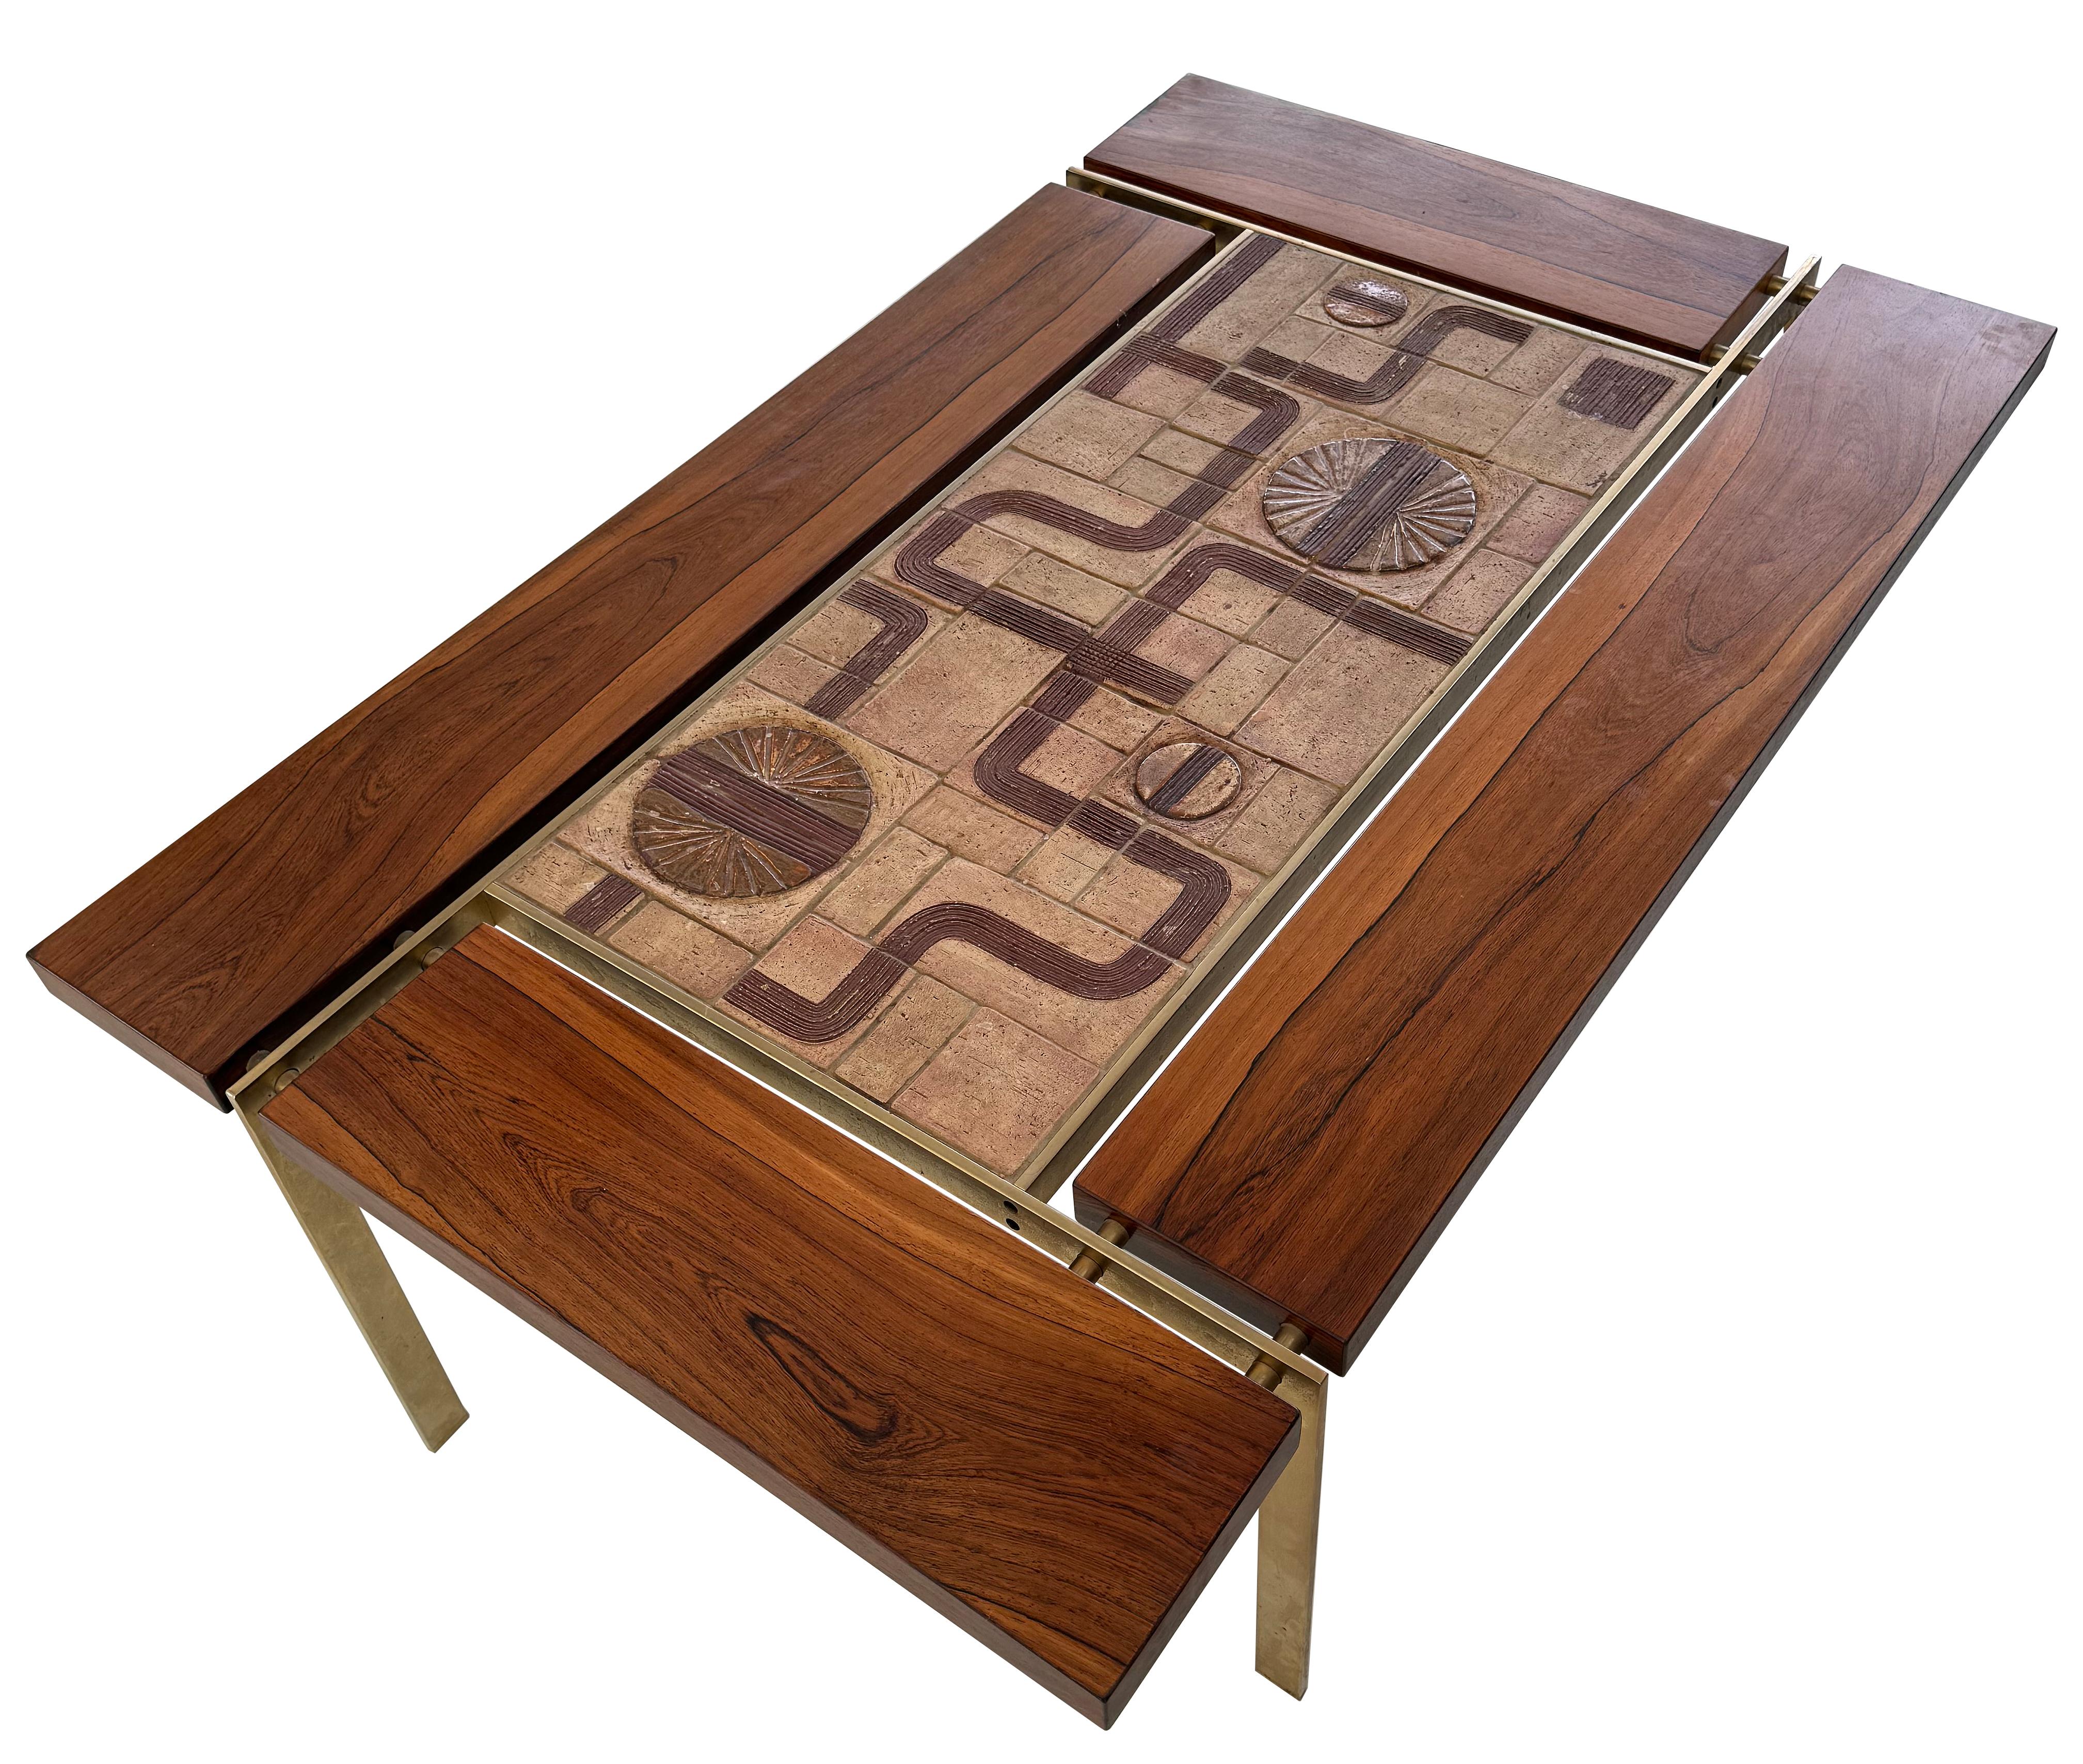 An incredible large coffee table in rosewood and brass by Svend Aage Jessen ca. 1965.     This table has incredible presence and scale.  Rosewood segments are attached with solid brass spacers surrounding a large hand- made Sejer Tile middle.   This